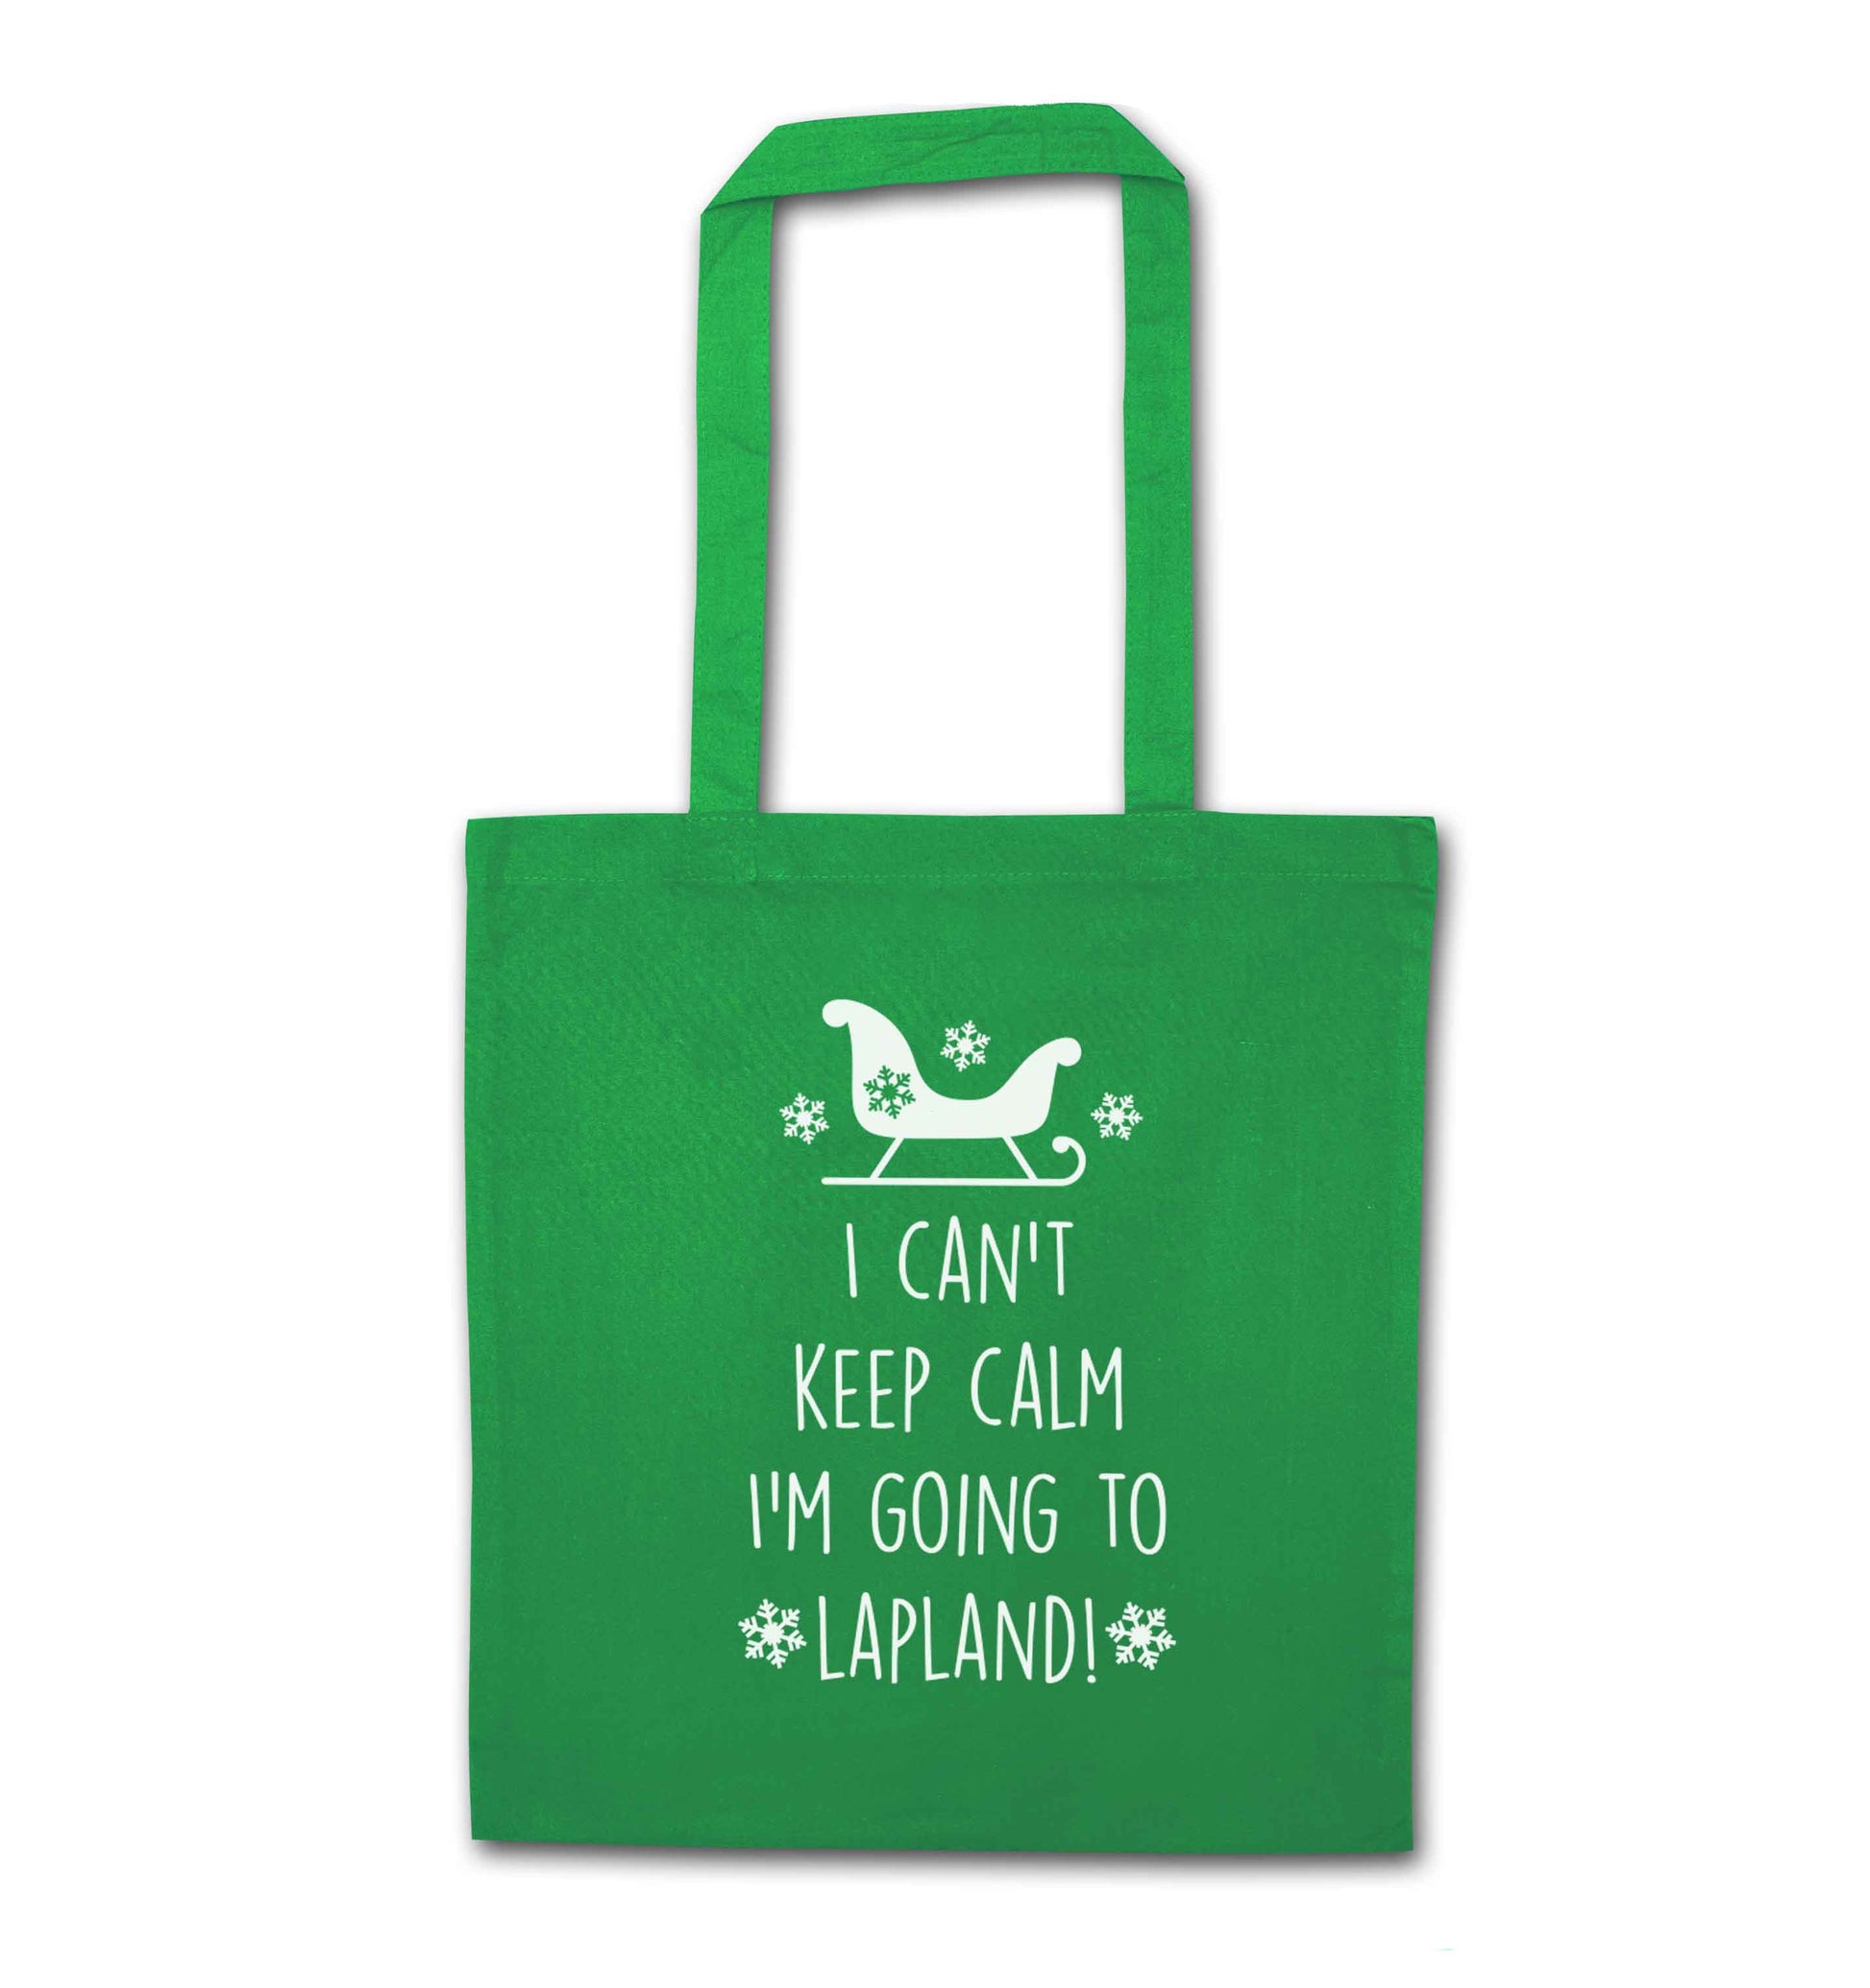 I can't keep calm I'm going to Lapland green tote bag